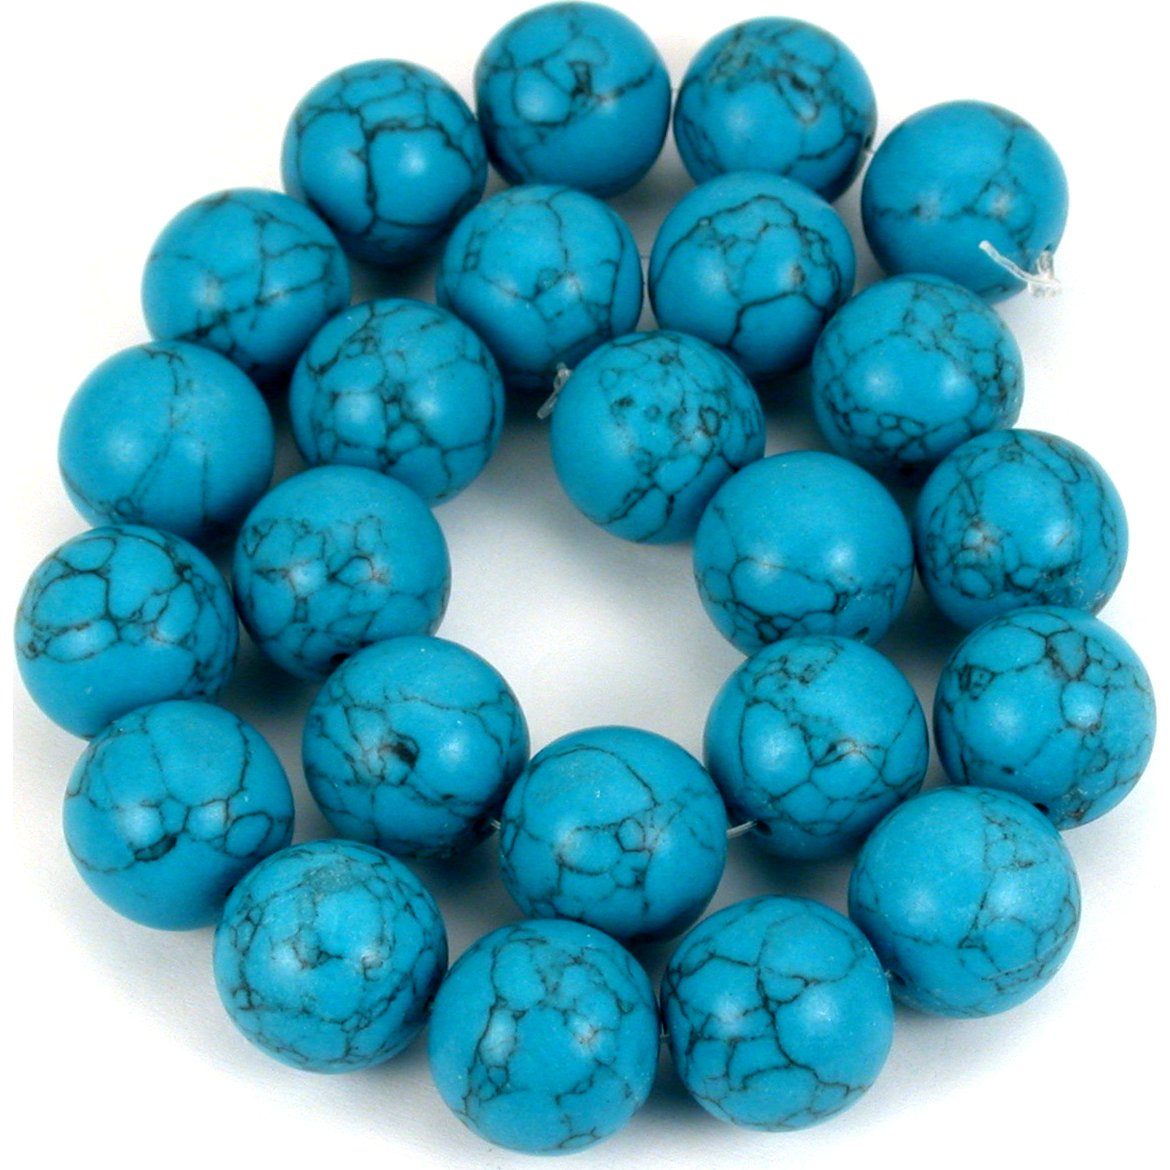 Turquoise Matrix Synthetic Round Beads 16mm 1 Strand